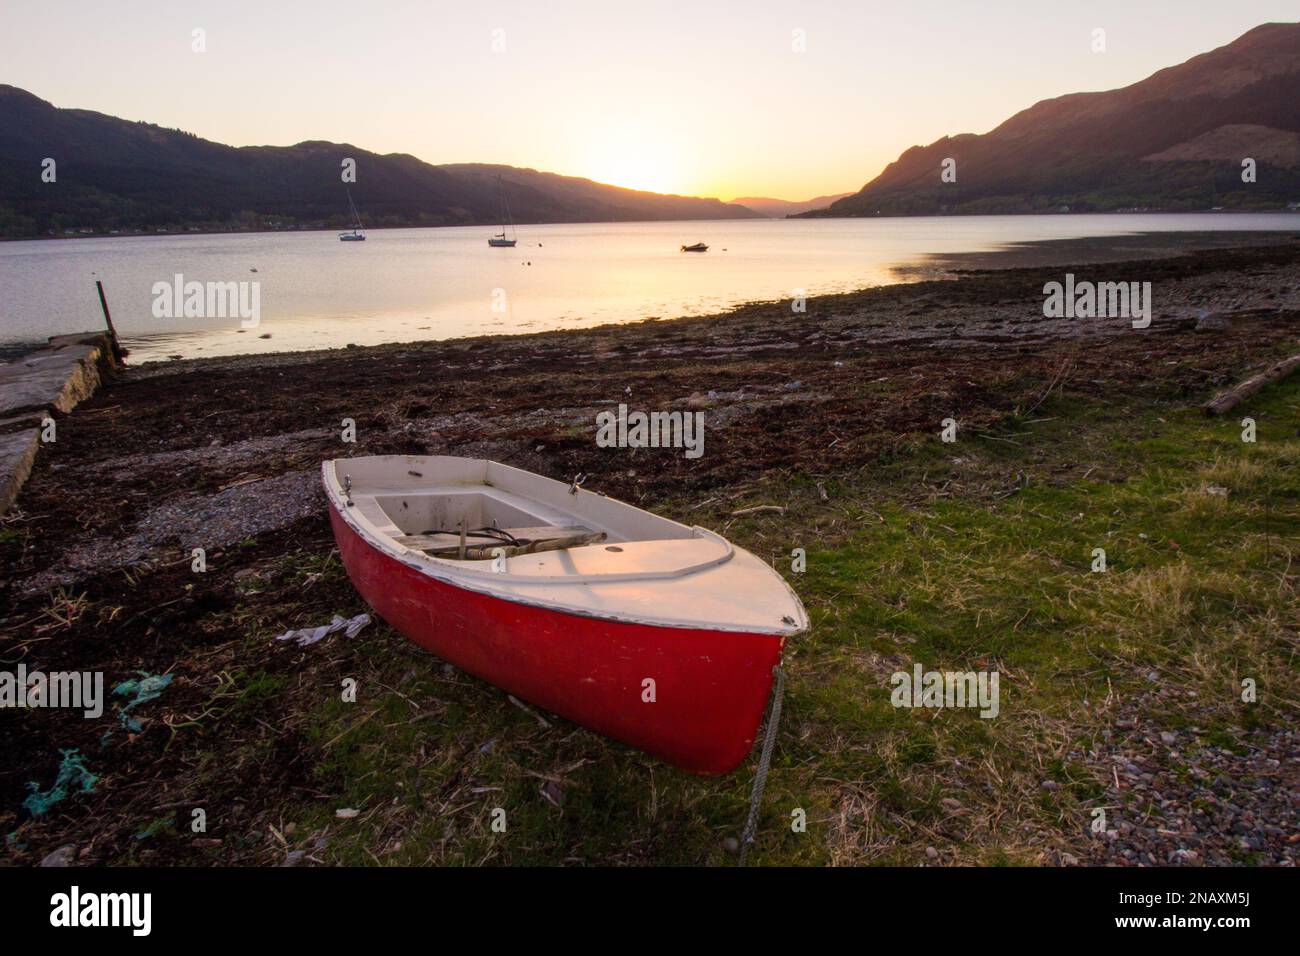 Sunset over Loch Duich, Scotland, with a single red beached rowboat Stock Photo